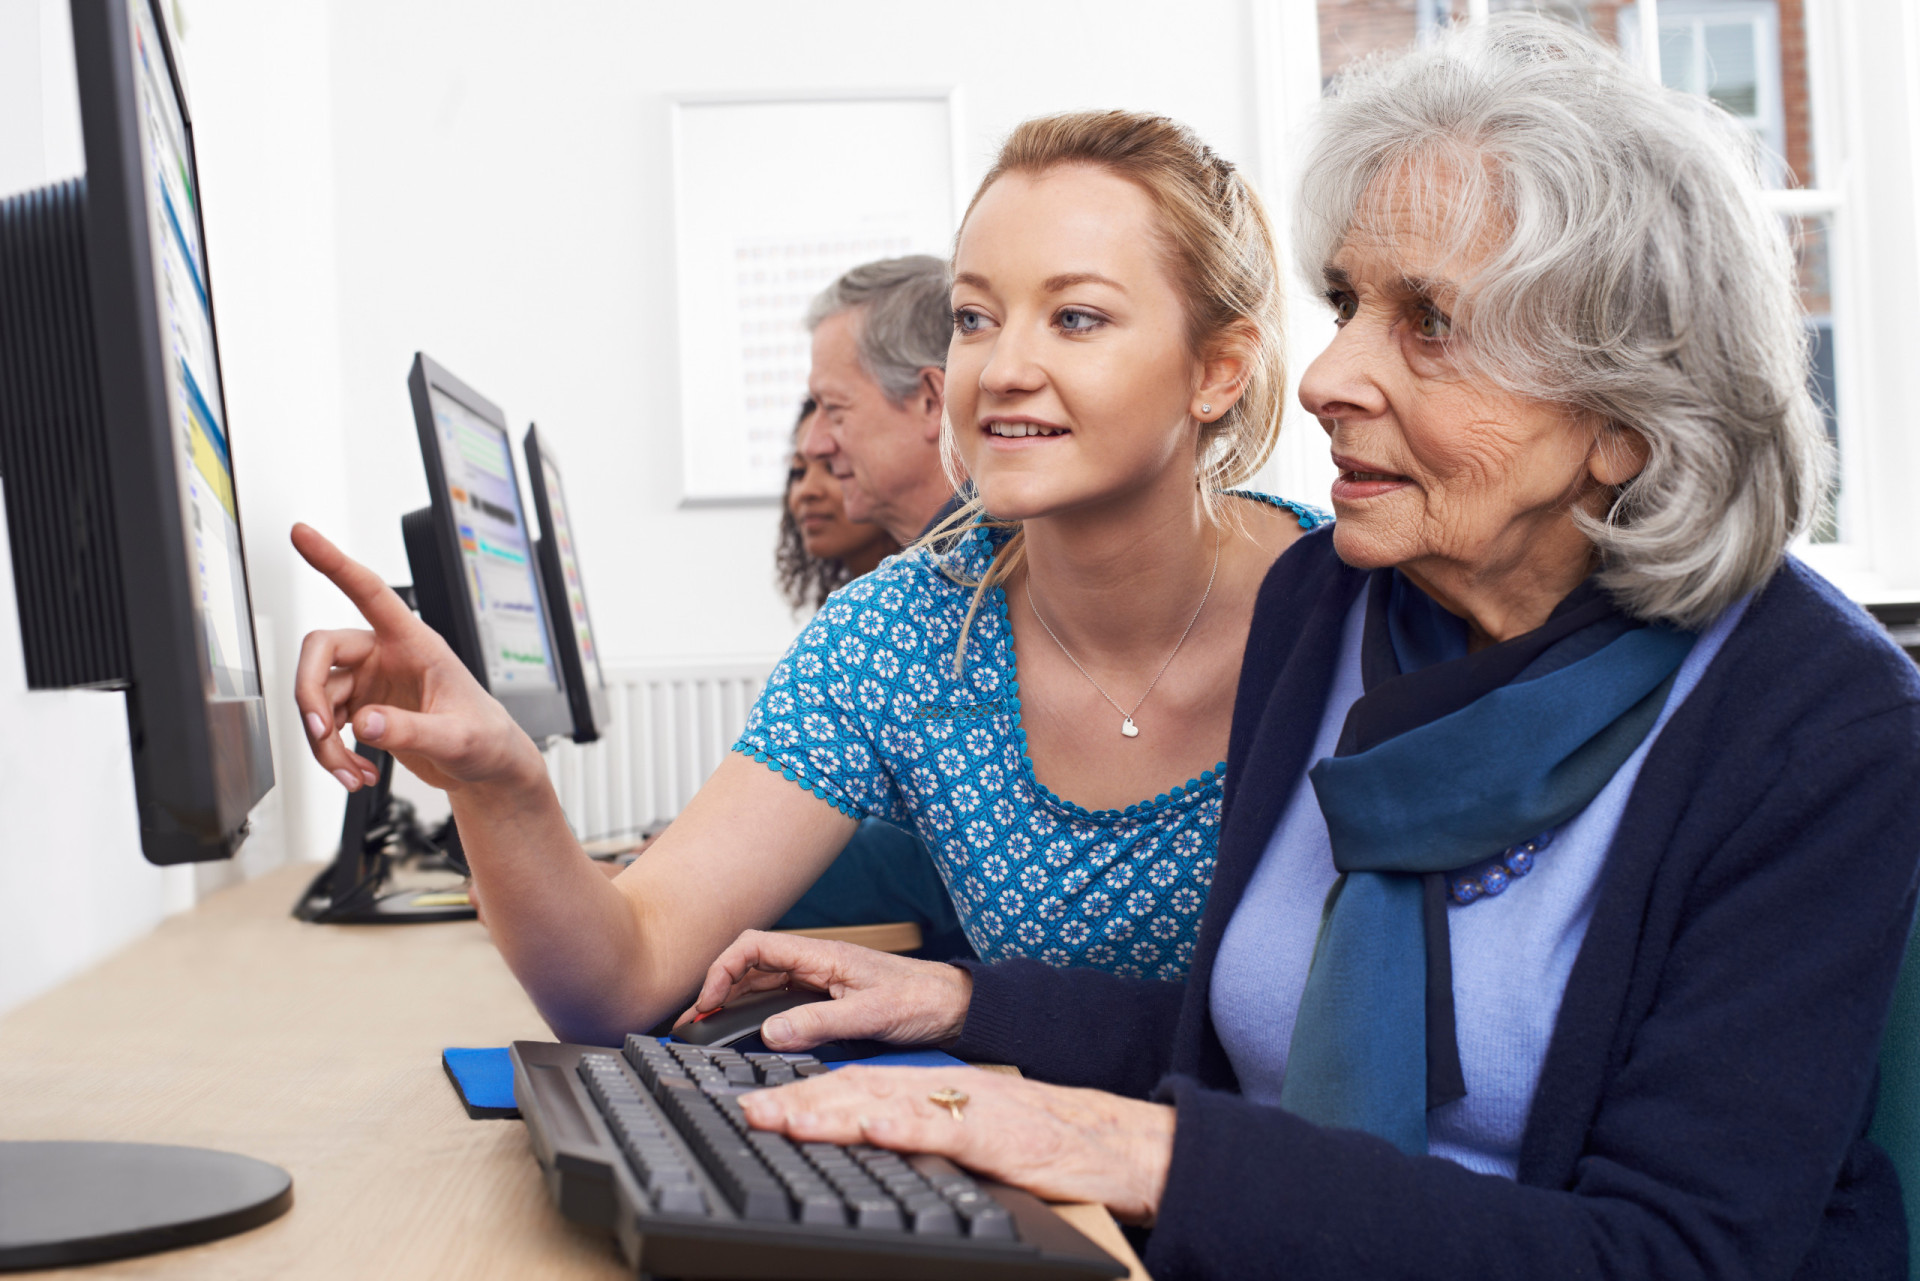 <p>The elderly often face challenges in navigating devices and software. So offering computer skill classes for seniors addresses a critical need.</p><p>You may also like:<a href="https://www.starsinsider.com/n/476613?utm_source=msn.com&utm_medium=display&utm_campaign=referral_description&utm_content=670061en-en"> Bodybuilders who became successful actors</a></p>